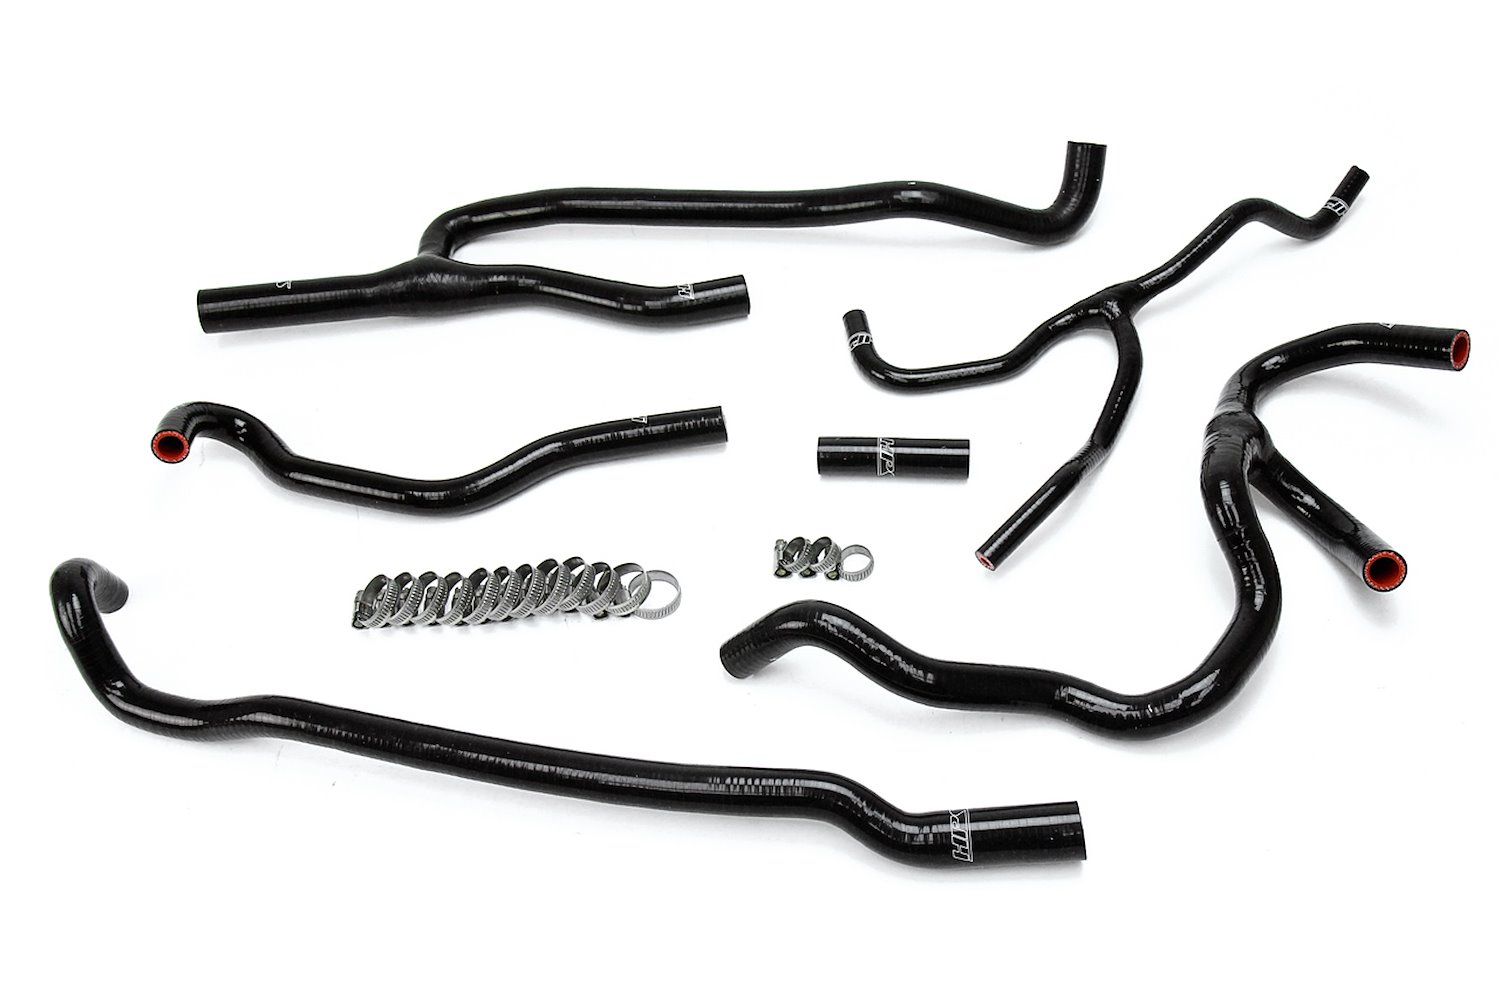 57-1660-BLK Heater Hose Kit, High-Temp 3-Ply Reinforced Silicone, Replace OEM Rubber Heater Coolant Hoses